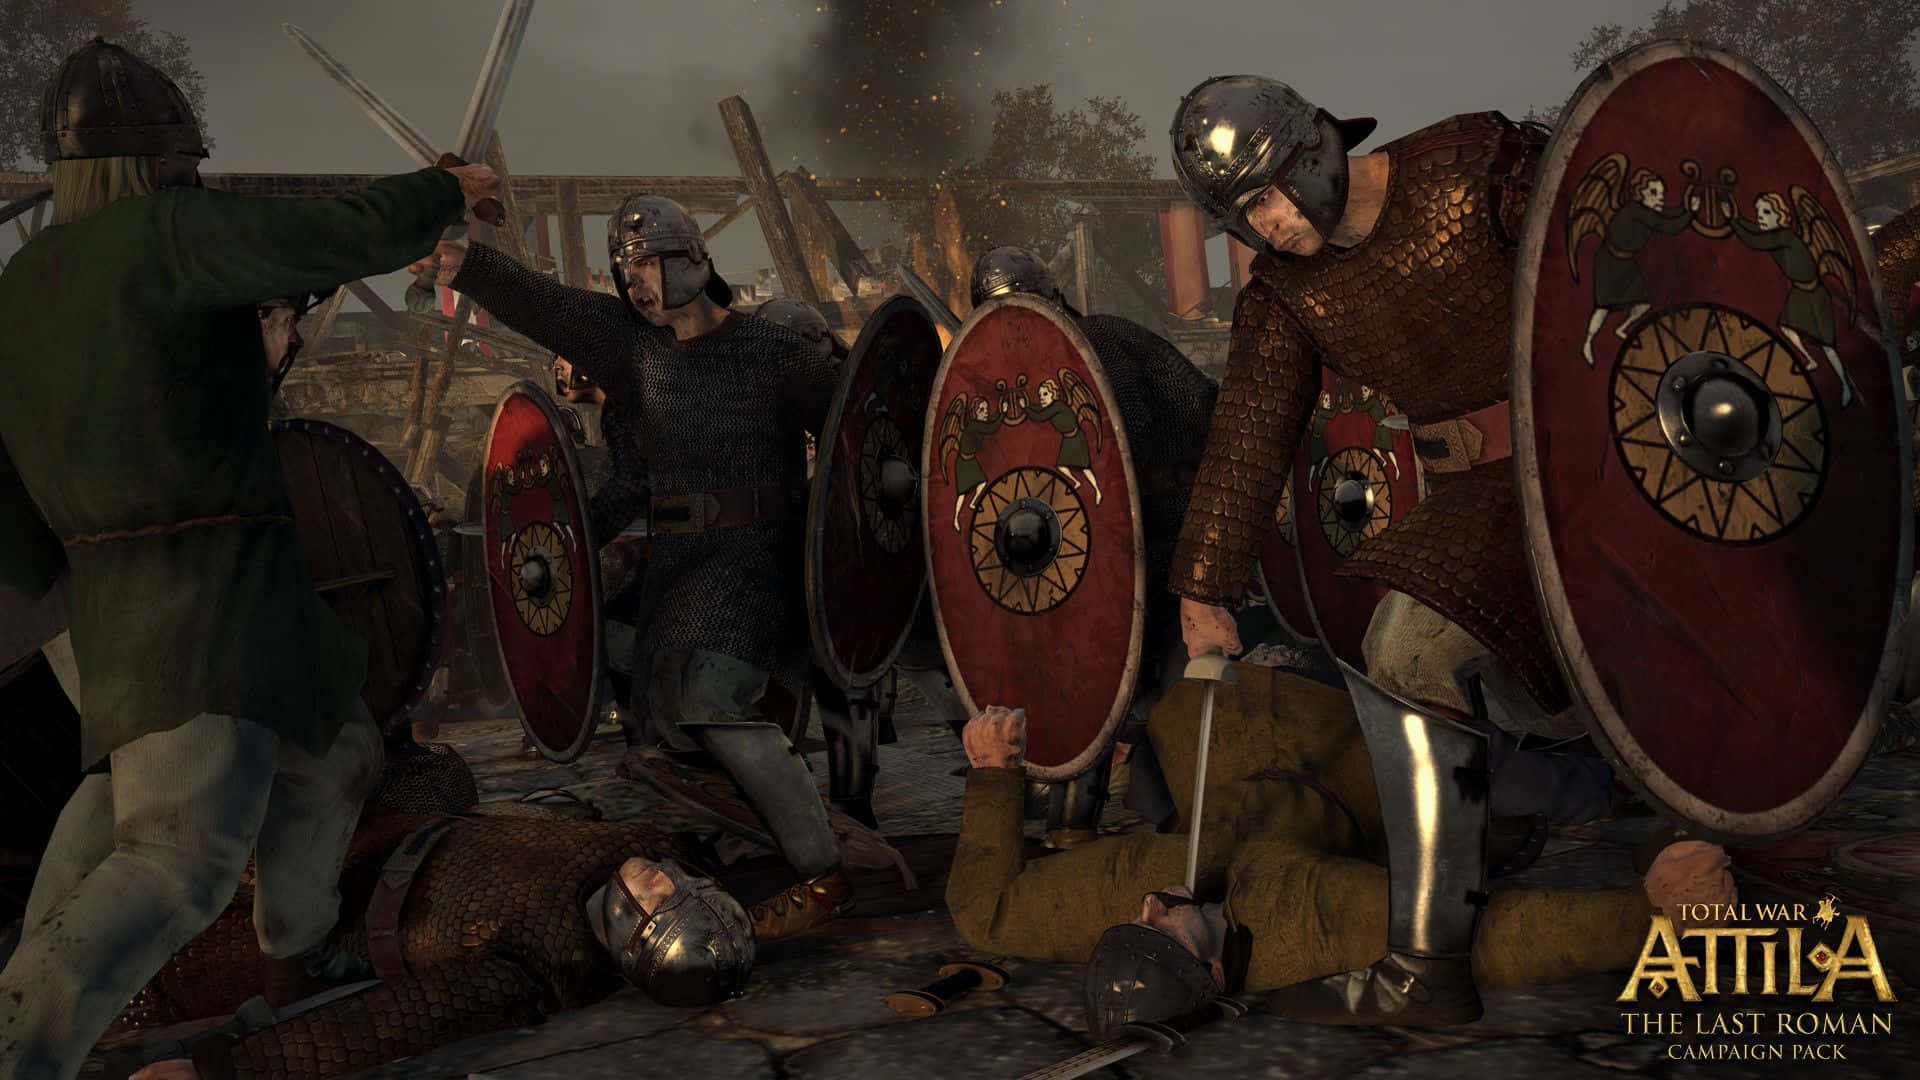 Rallying The Troops For The Wars Ahead In Attila: Total War